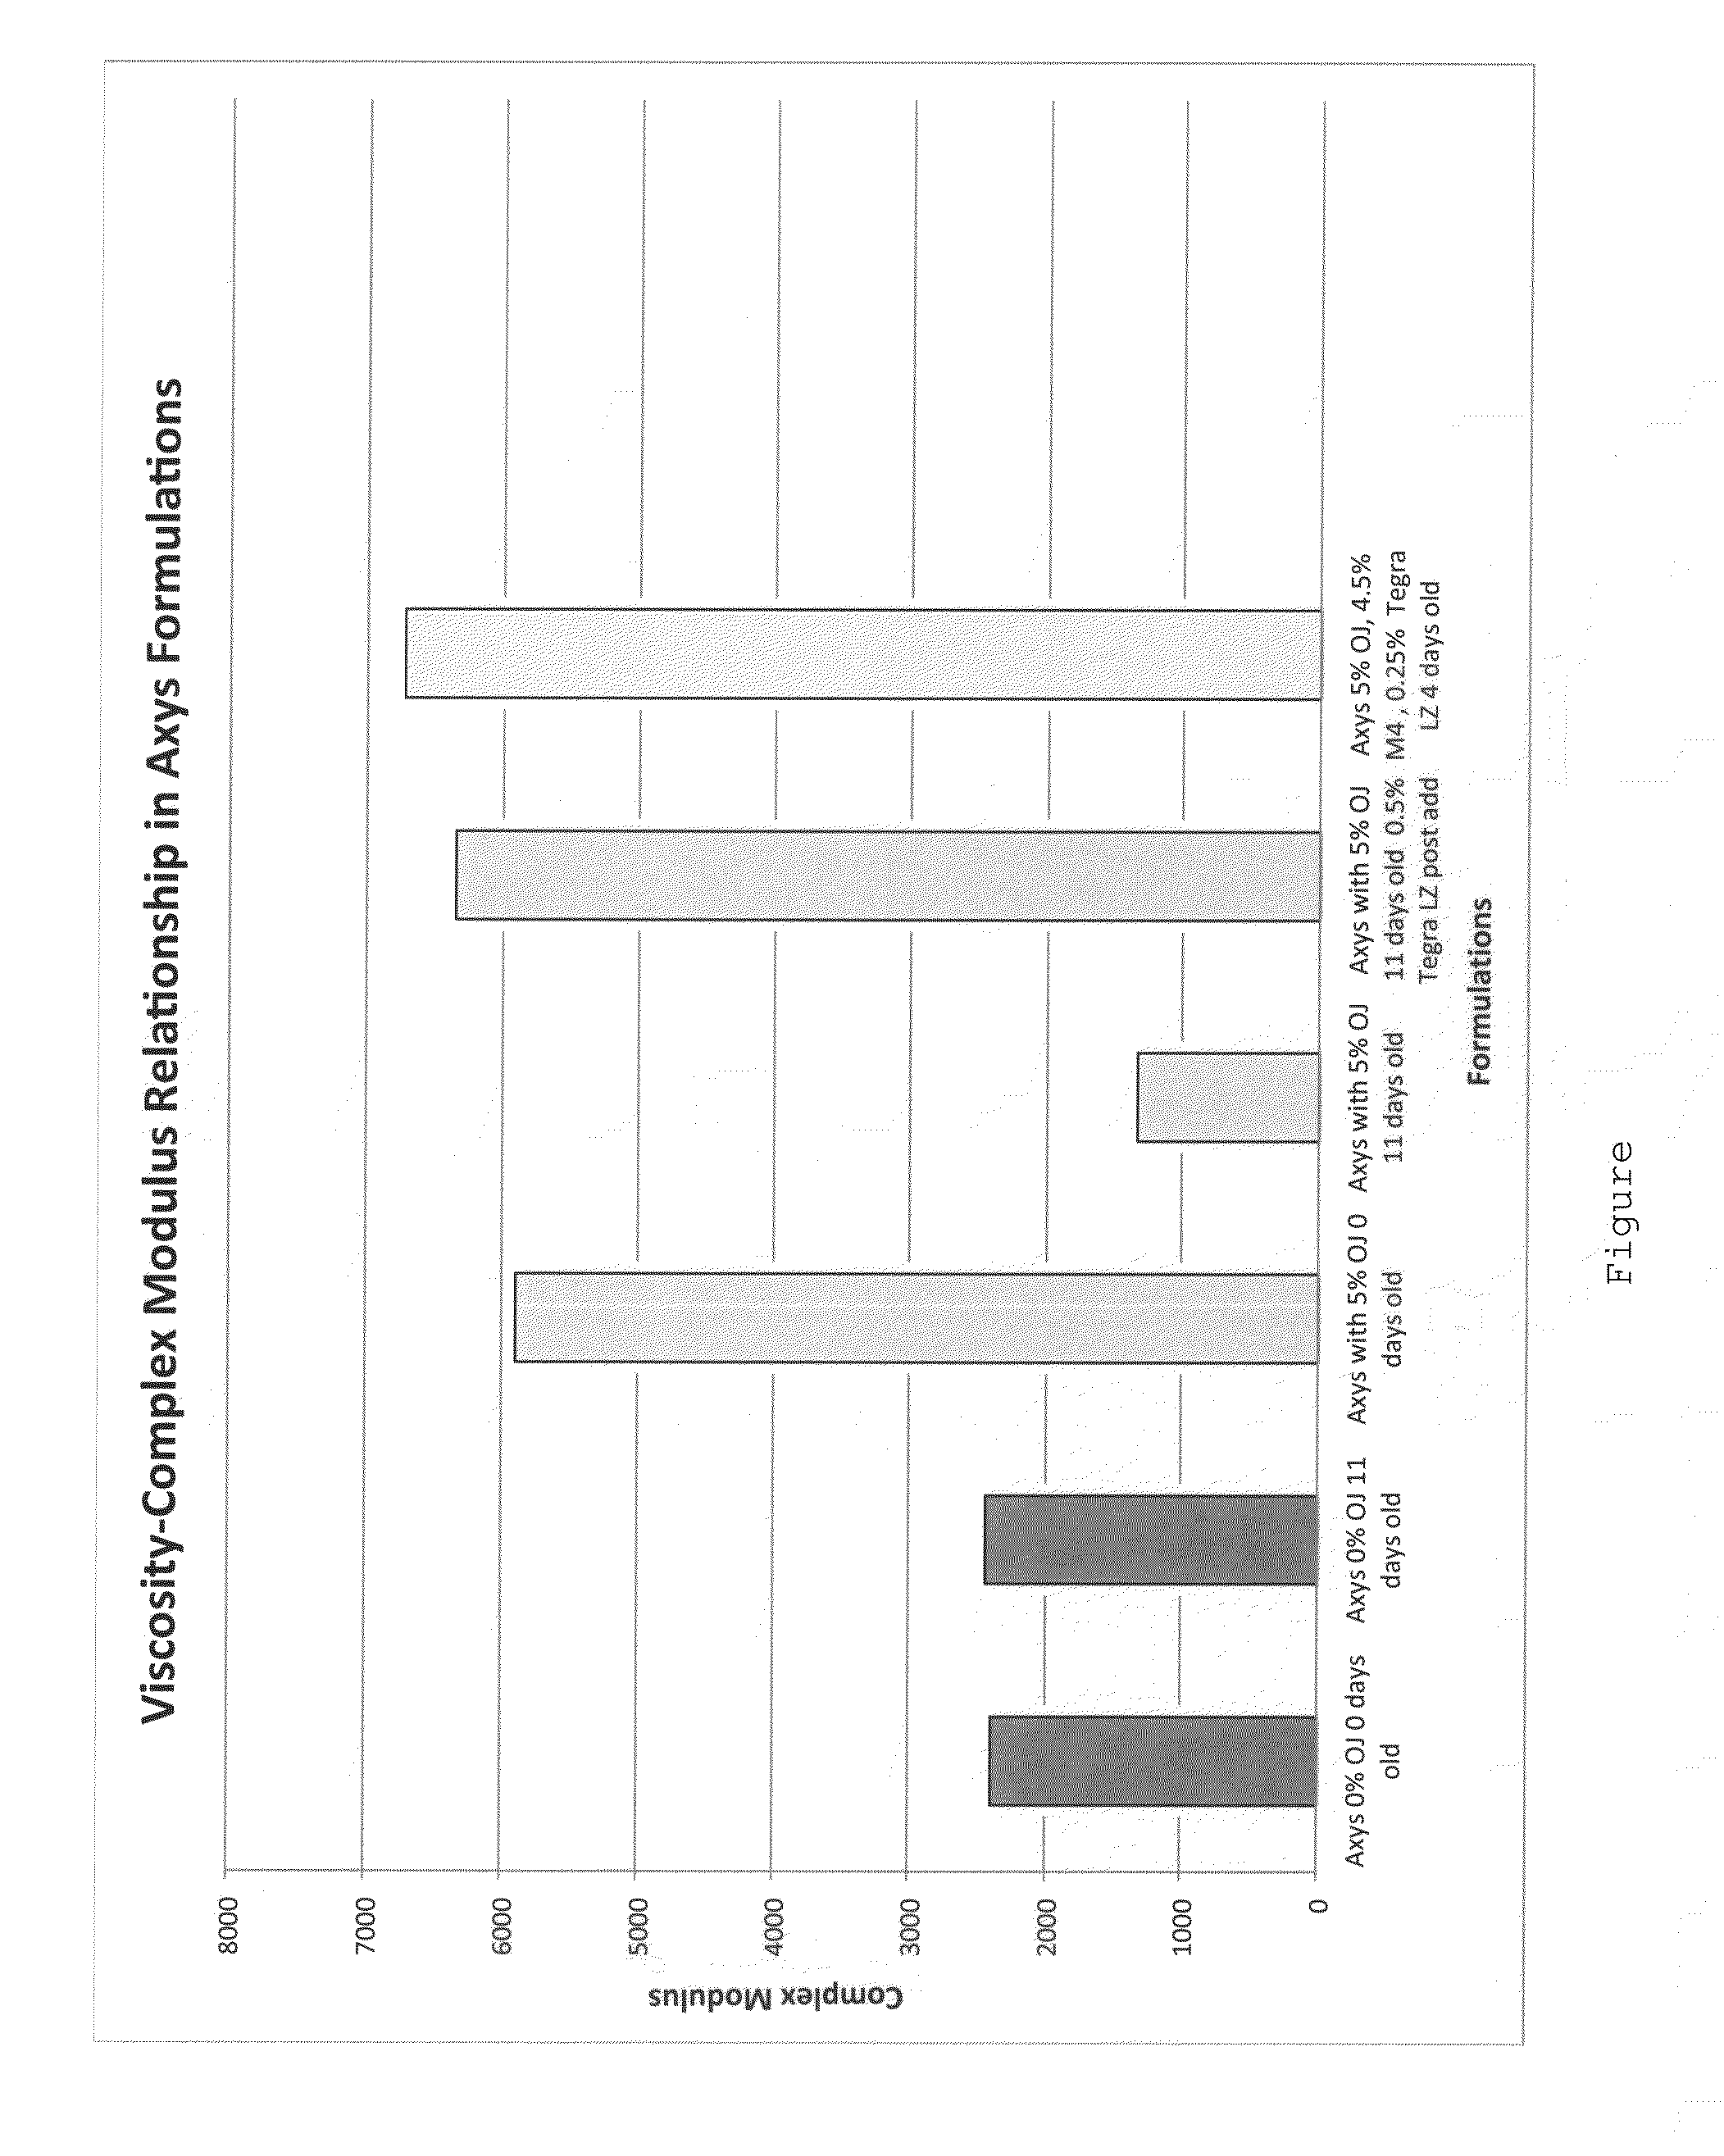 Composition and method for roads, parking lots, and driving surfaces